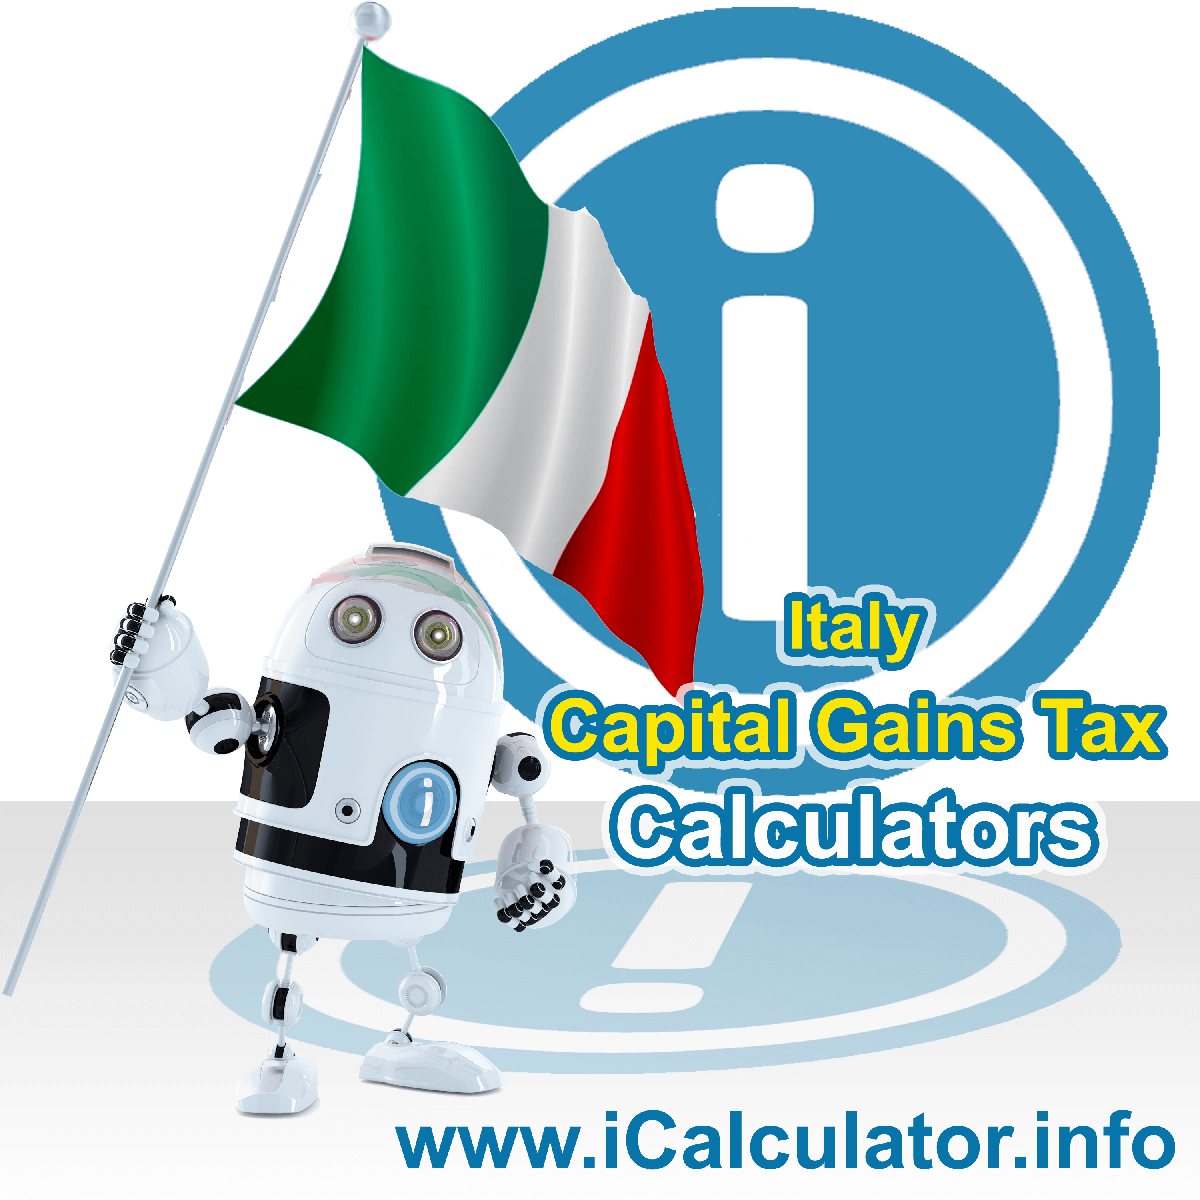 Italy Capital Gains Tax Calculator. This image shows the Italy flag and information relating to the capital gains tax rate formula used for calculating Capital Gains Tax in Italy using the Italy Capital Gains Tax Calculator in 2023